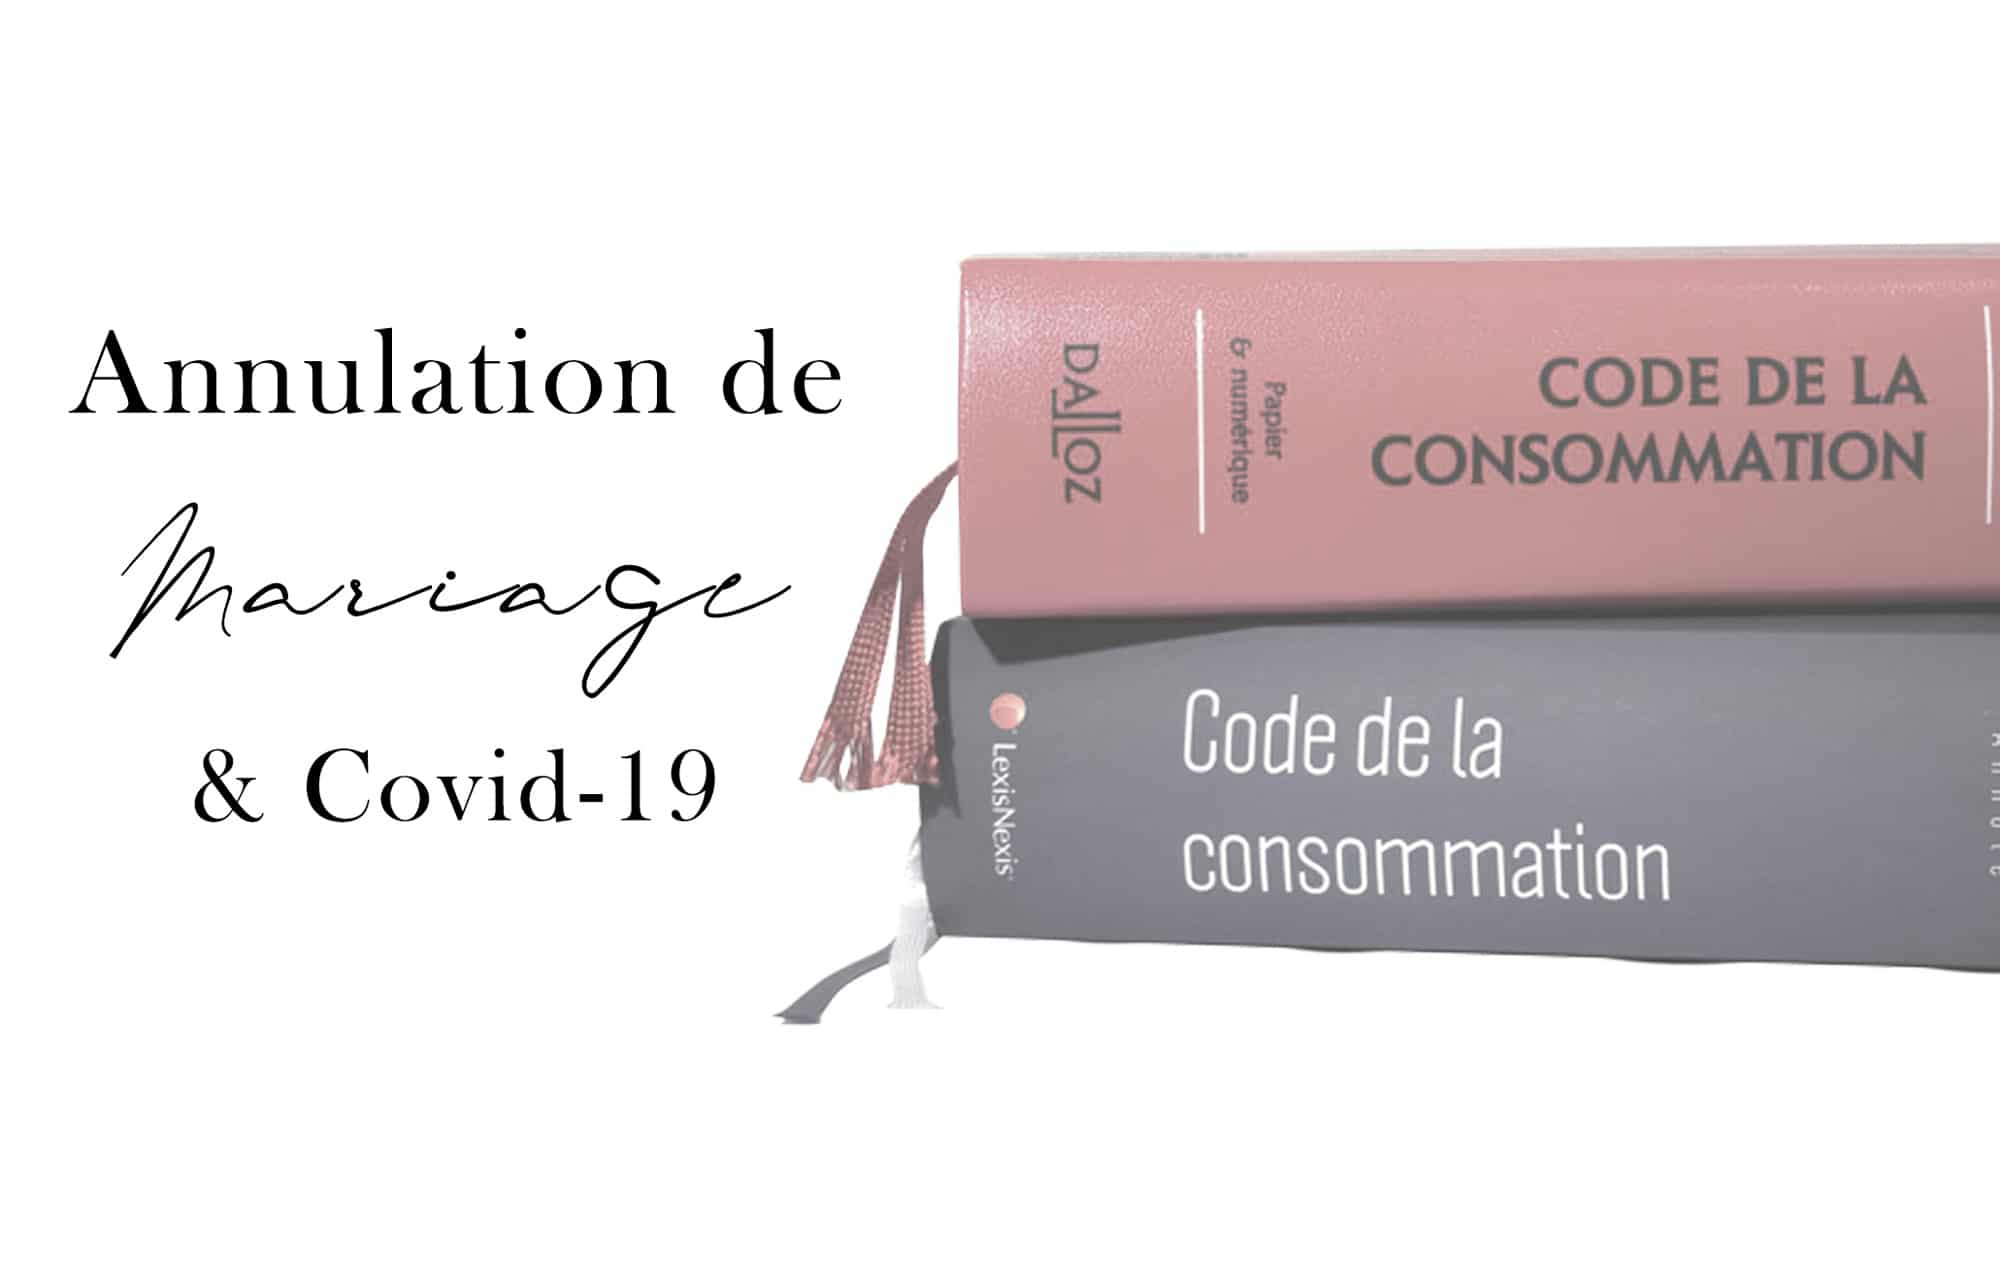 annulation mariage covid 19 report acompte